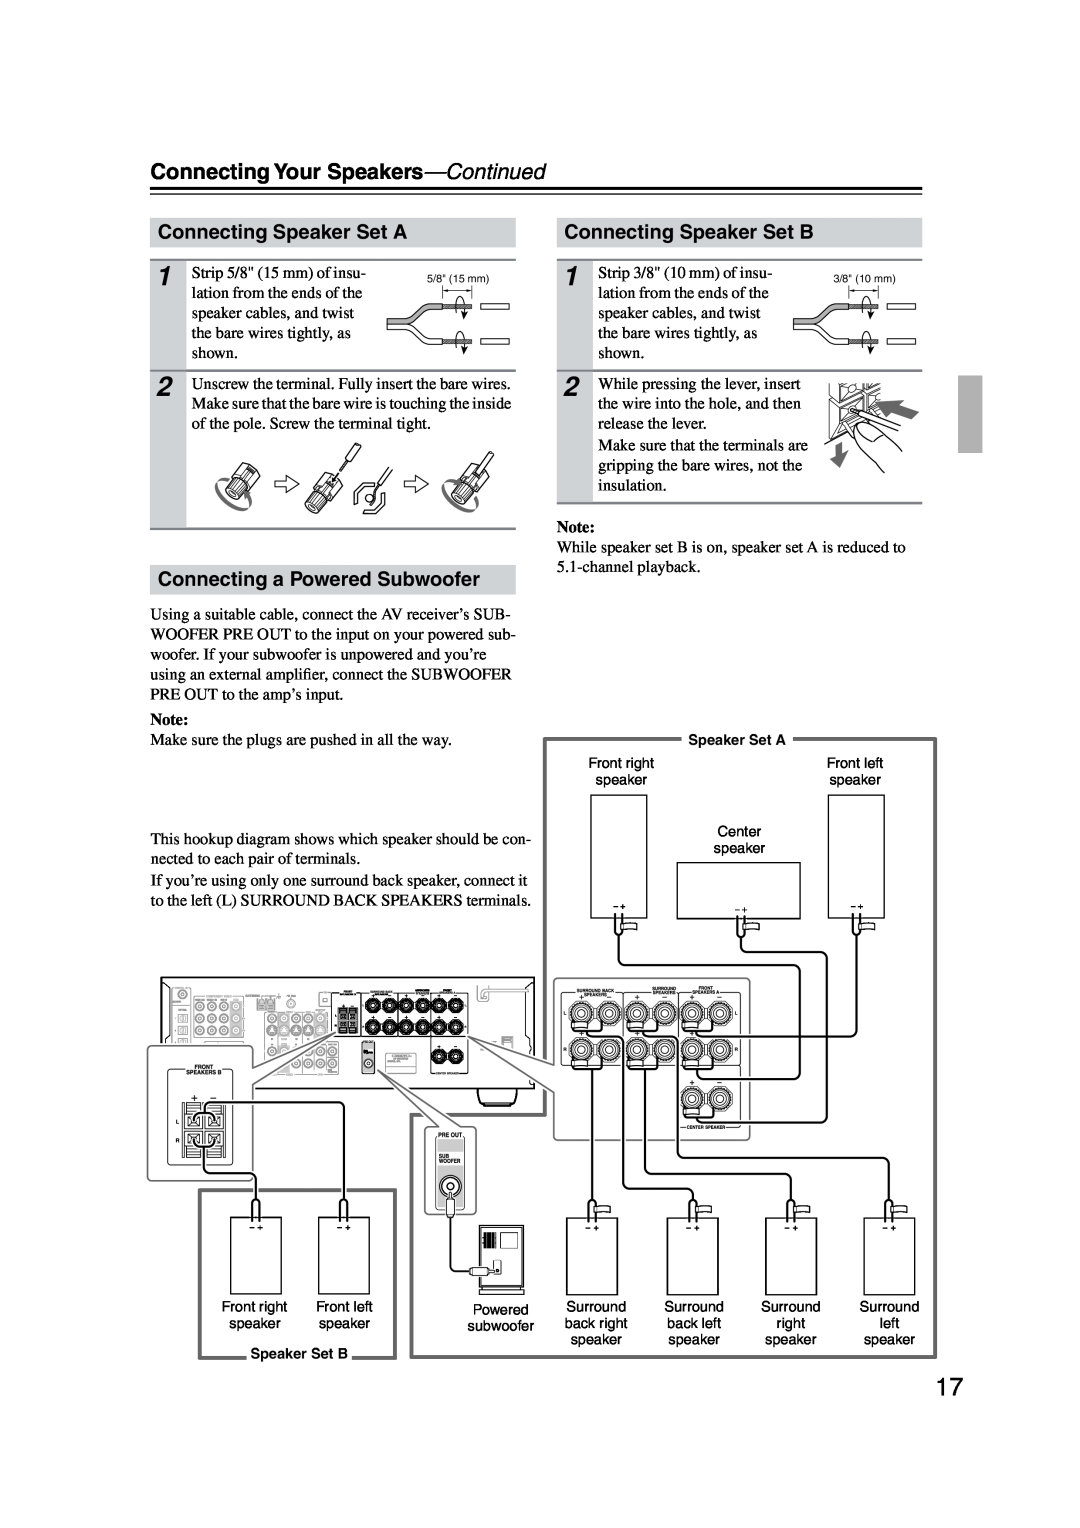 Onkyo TX-SR573 instruction manual Connecting Speaker Set A, Connecting a Powered Subwoofer, Connecting Speaker Set B 